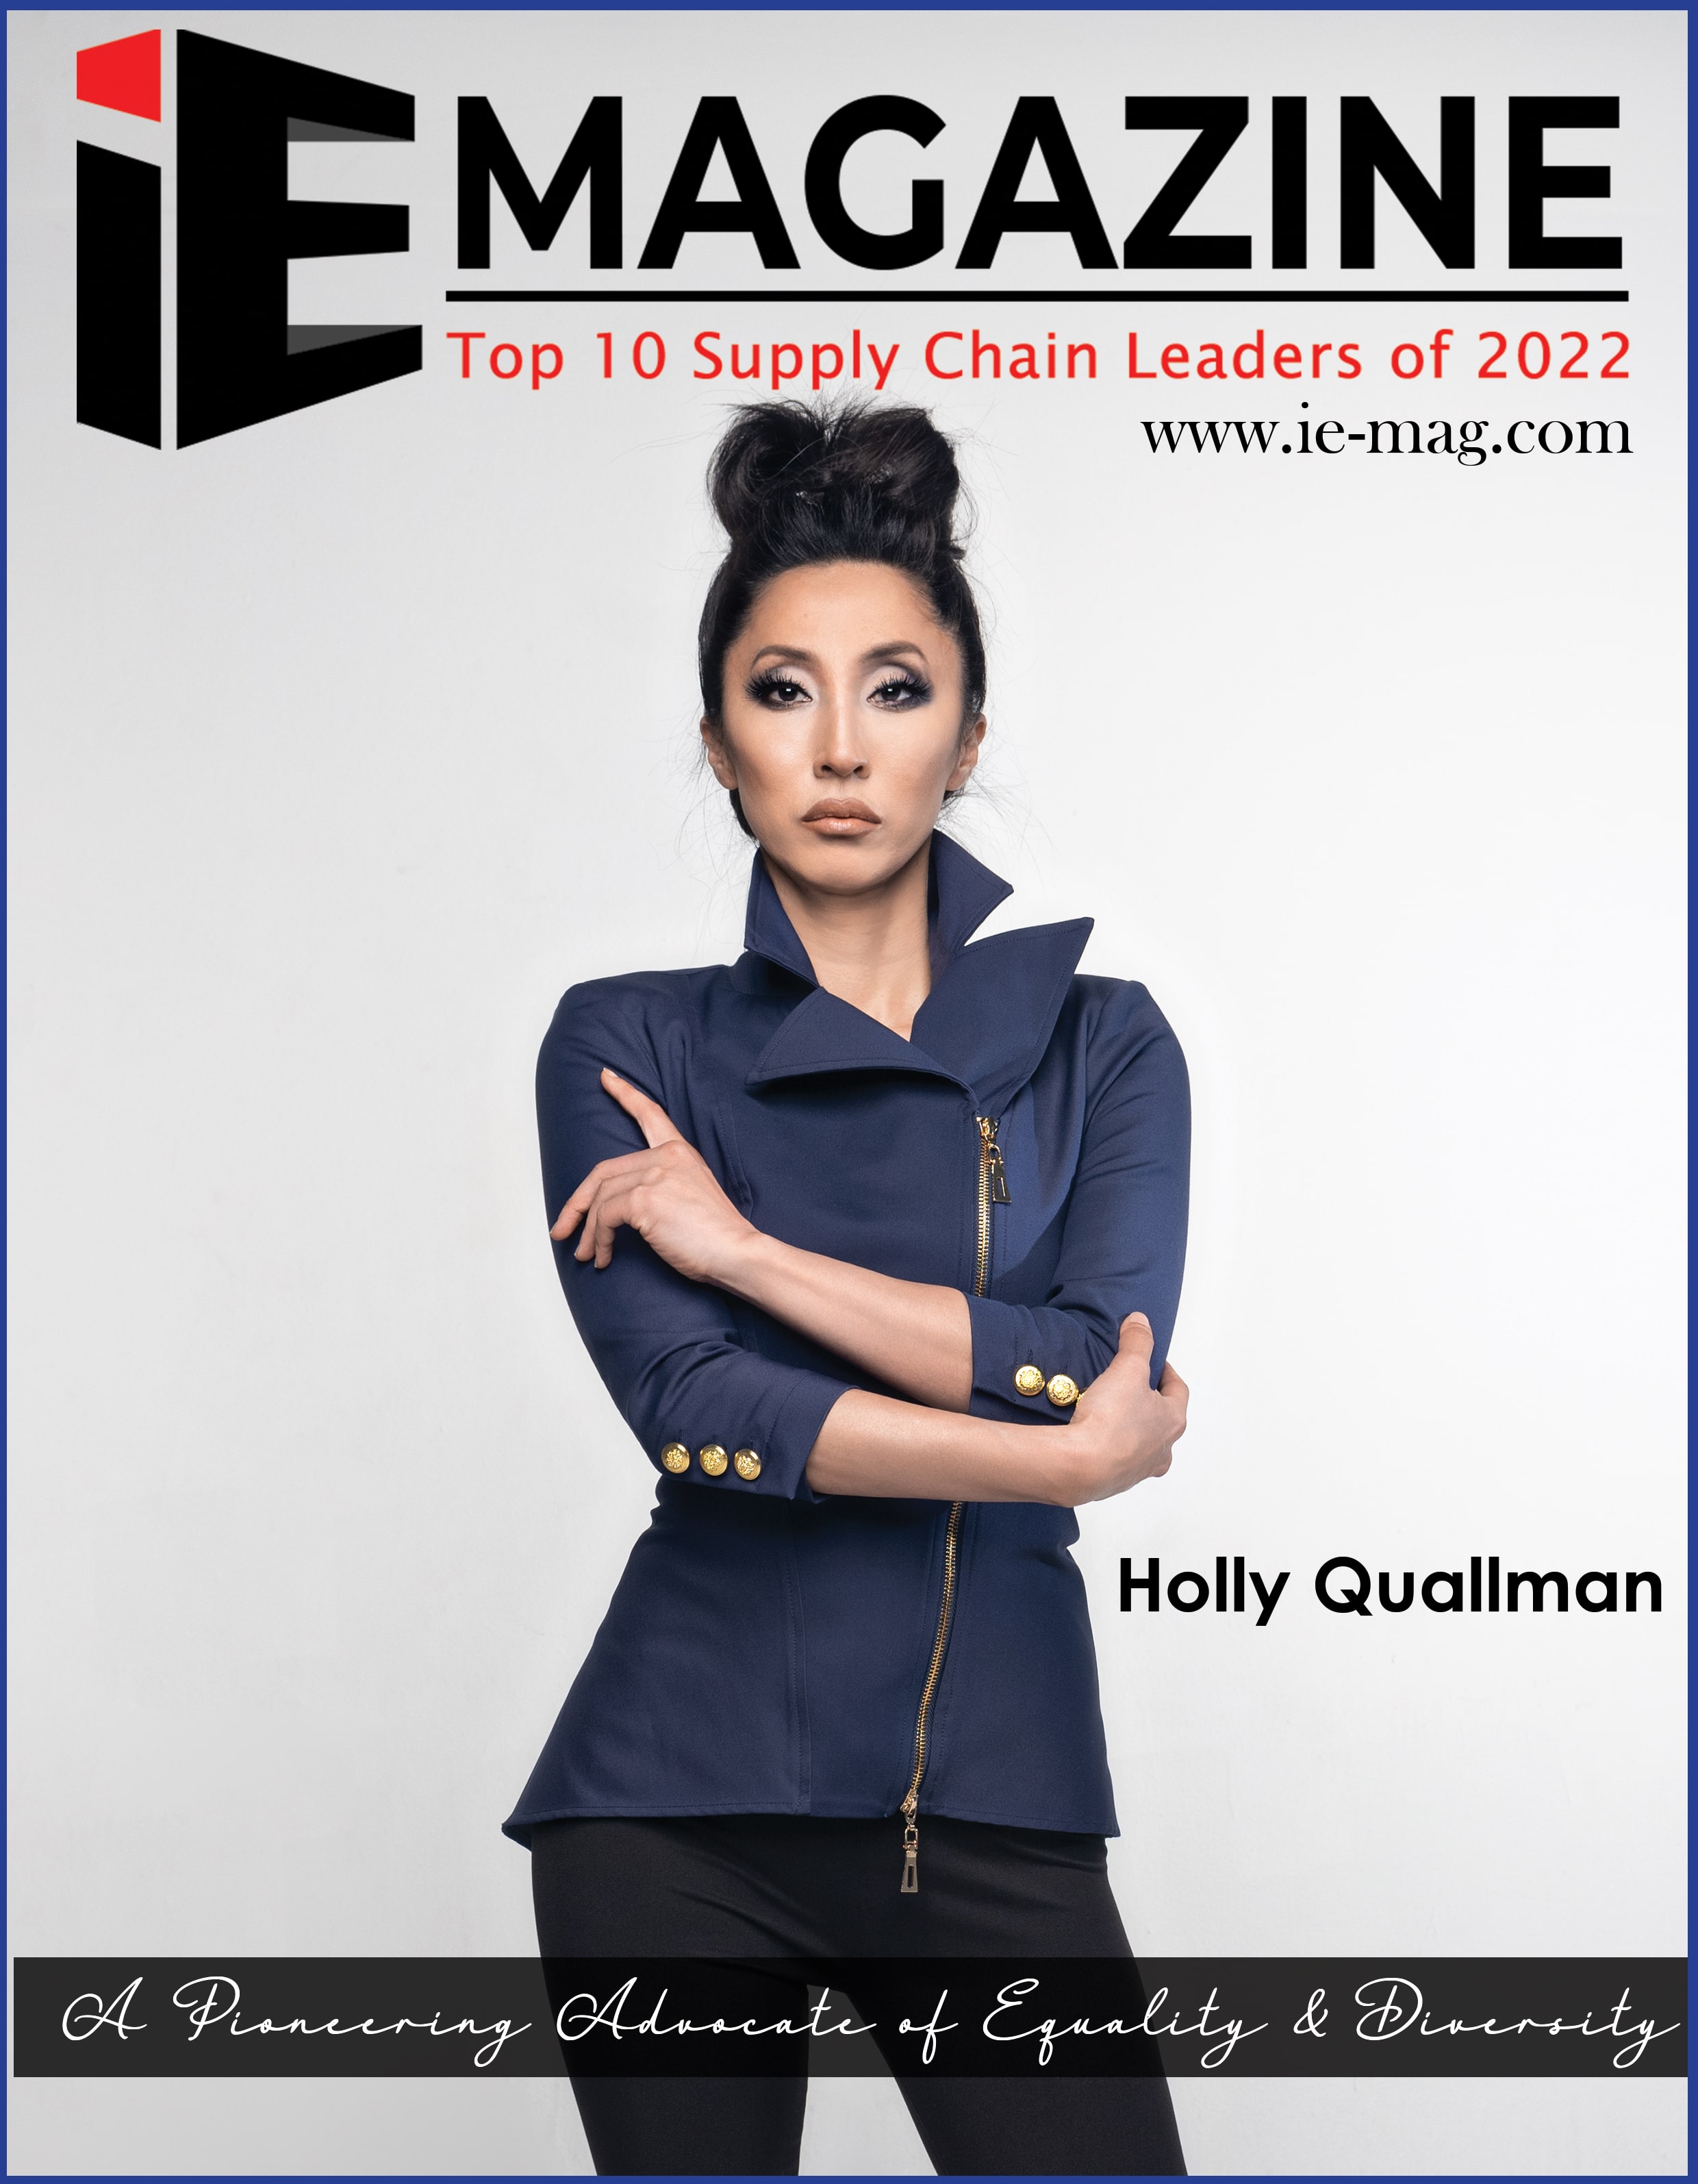 Top 10 Supply Chain Leaders of 2022 Magazine